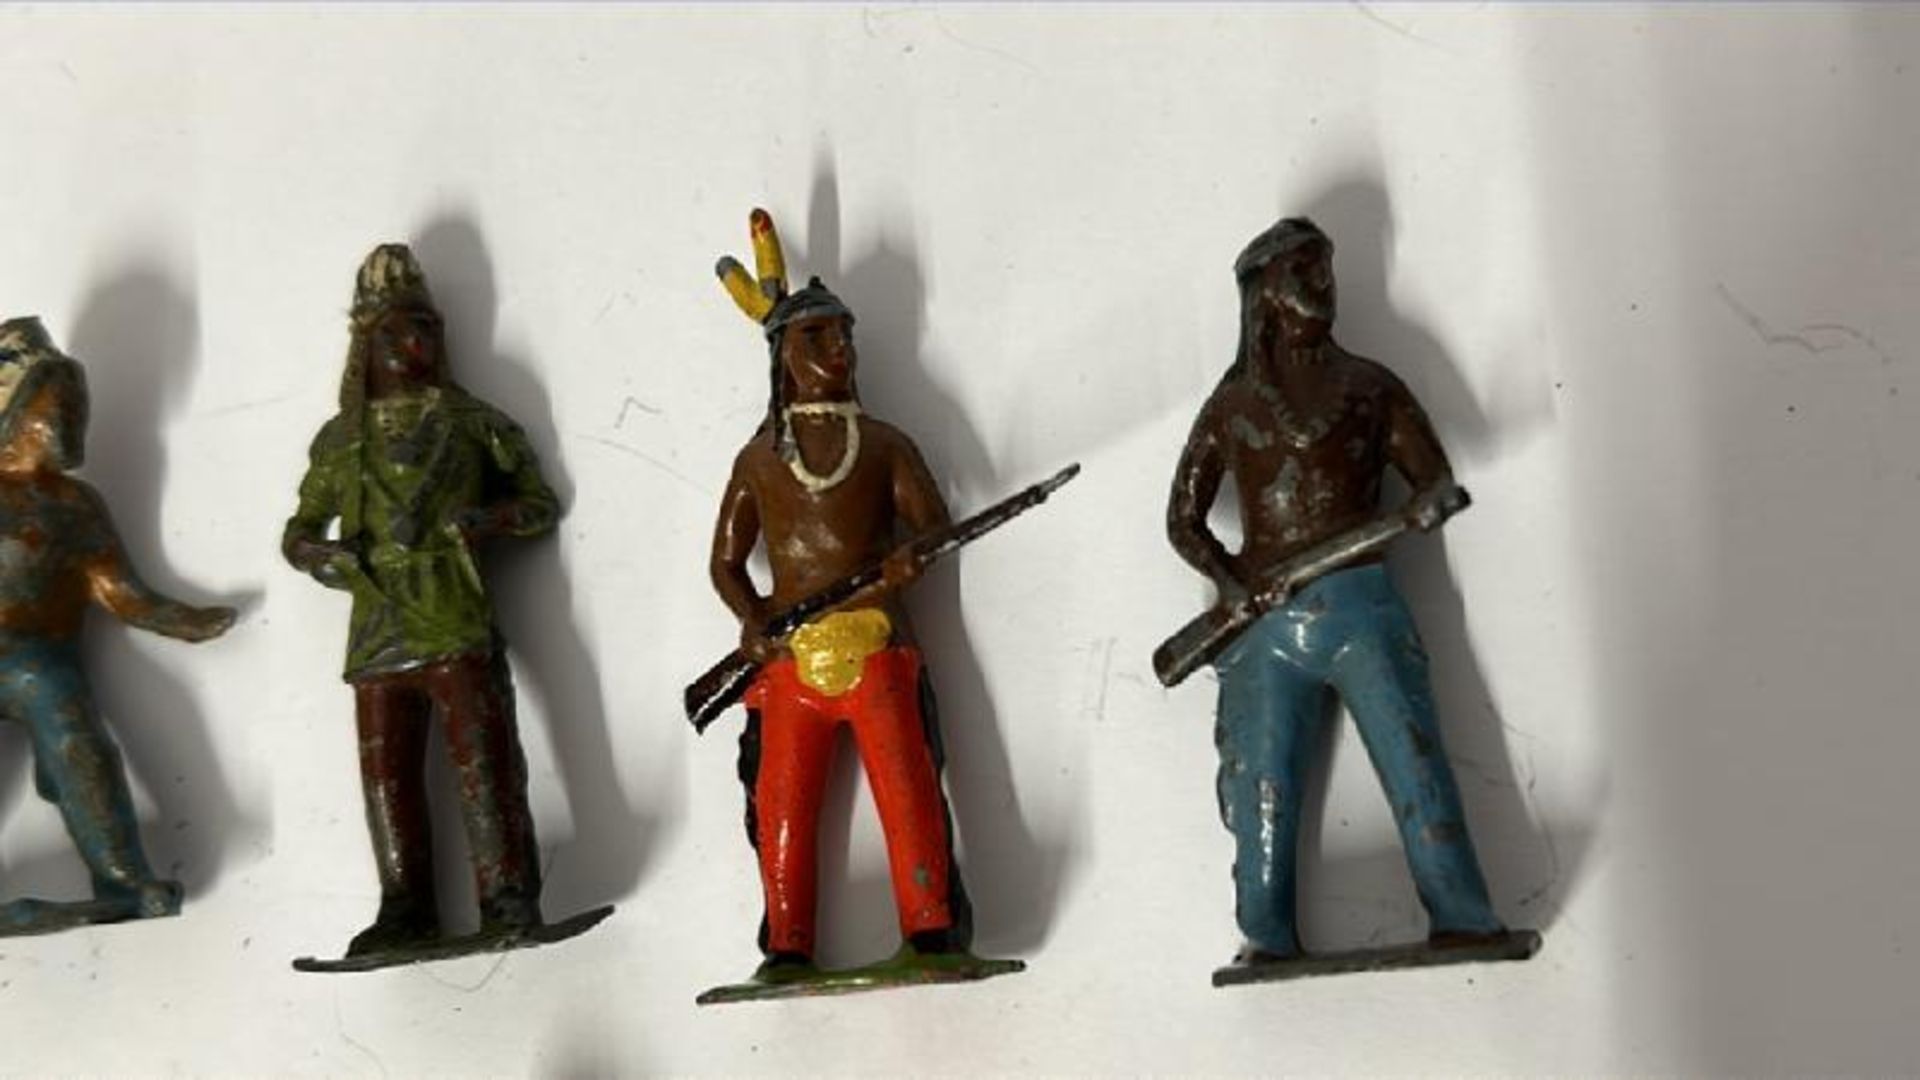 Mainly Britains lead 'Wild West' figures including horses, Cowboys and Native American warriors (29) - Image 3 of 11